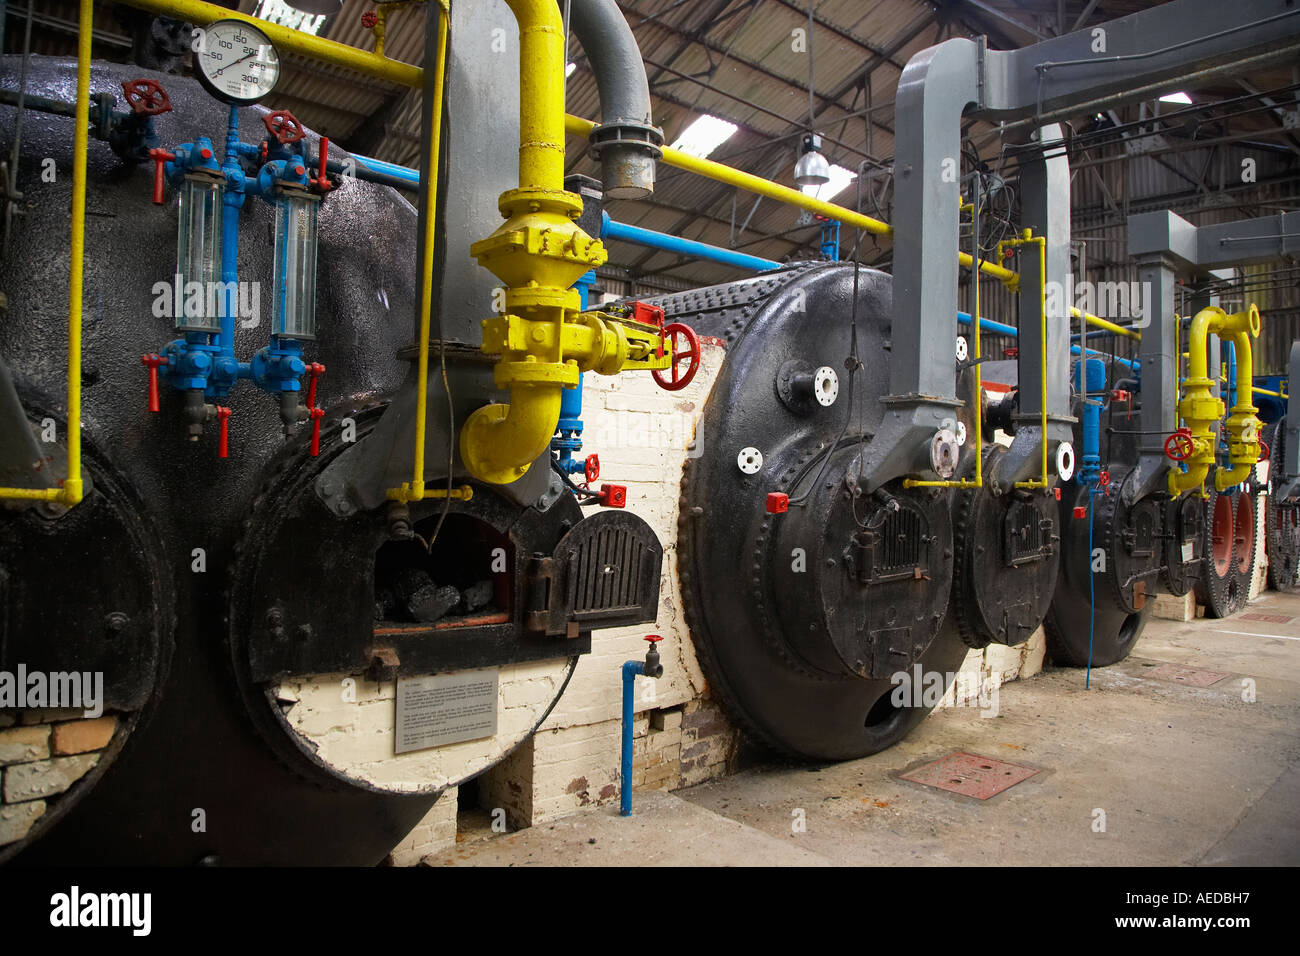 Interior Boilers in the Cefn Coed Mining Museum Neath Valley, South Wales, UK Stock Photo